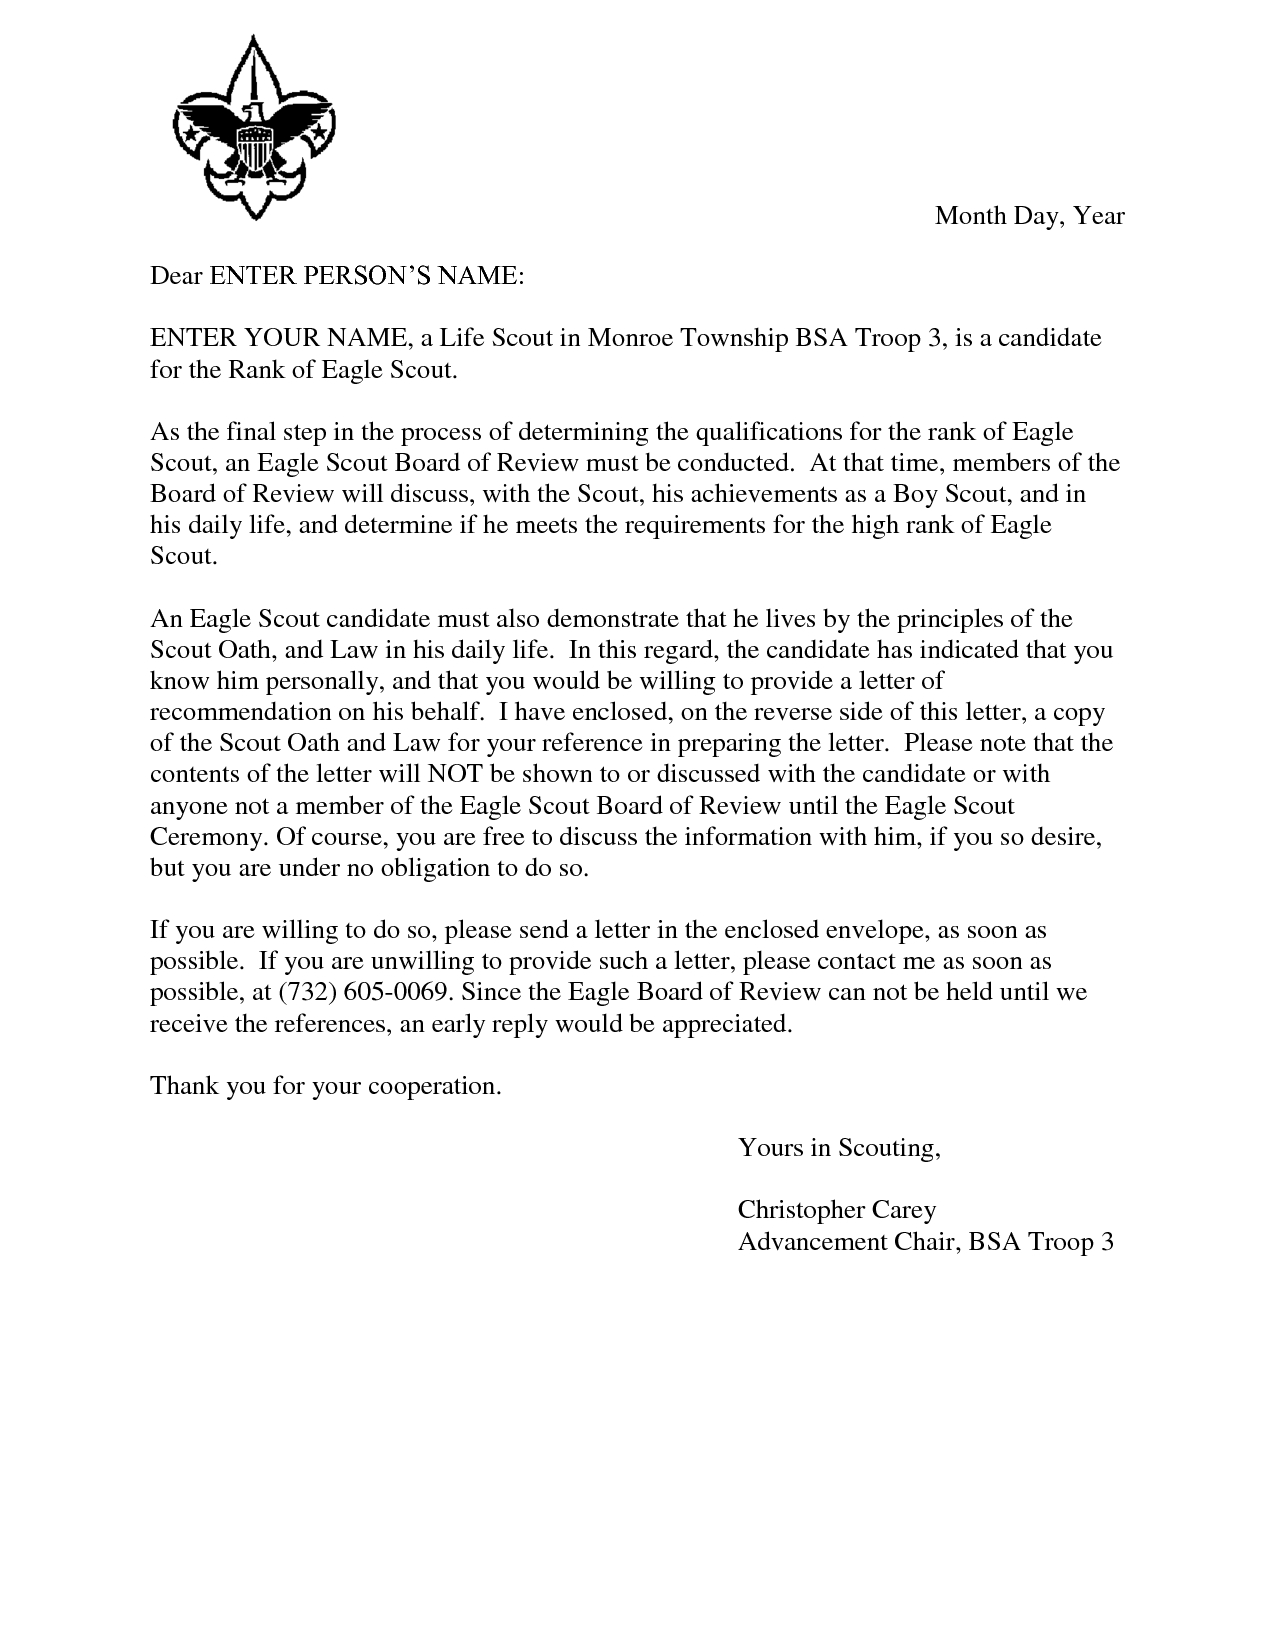 bsa-eagle-scout-reference-letter-form-invitation-template-ideas